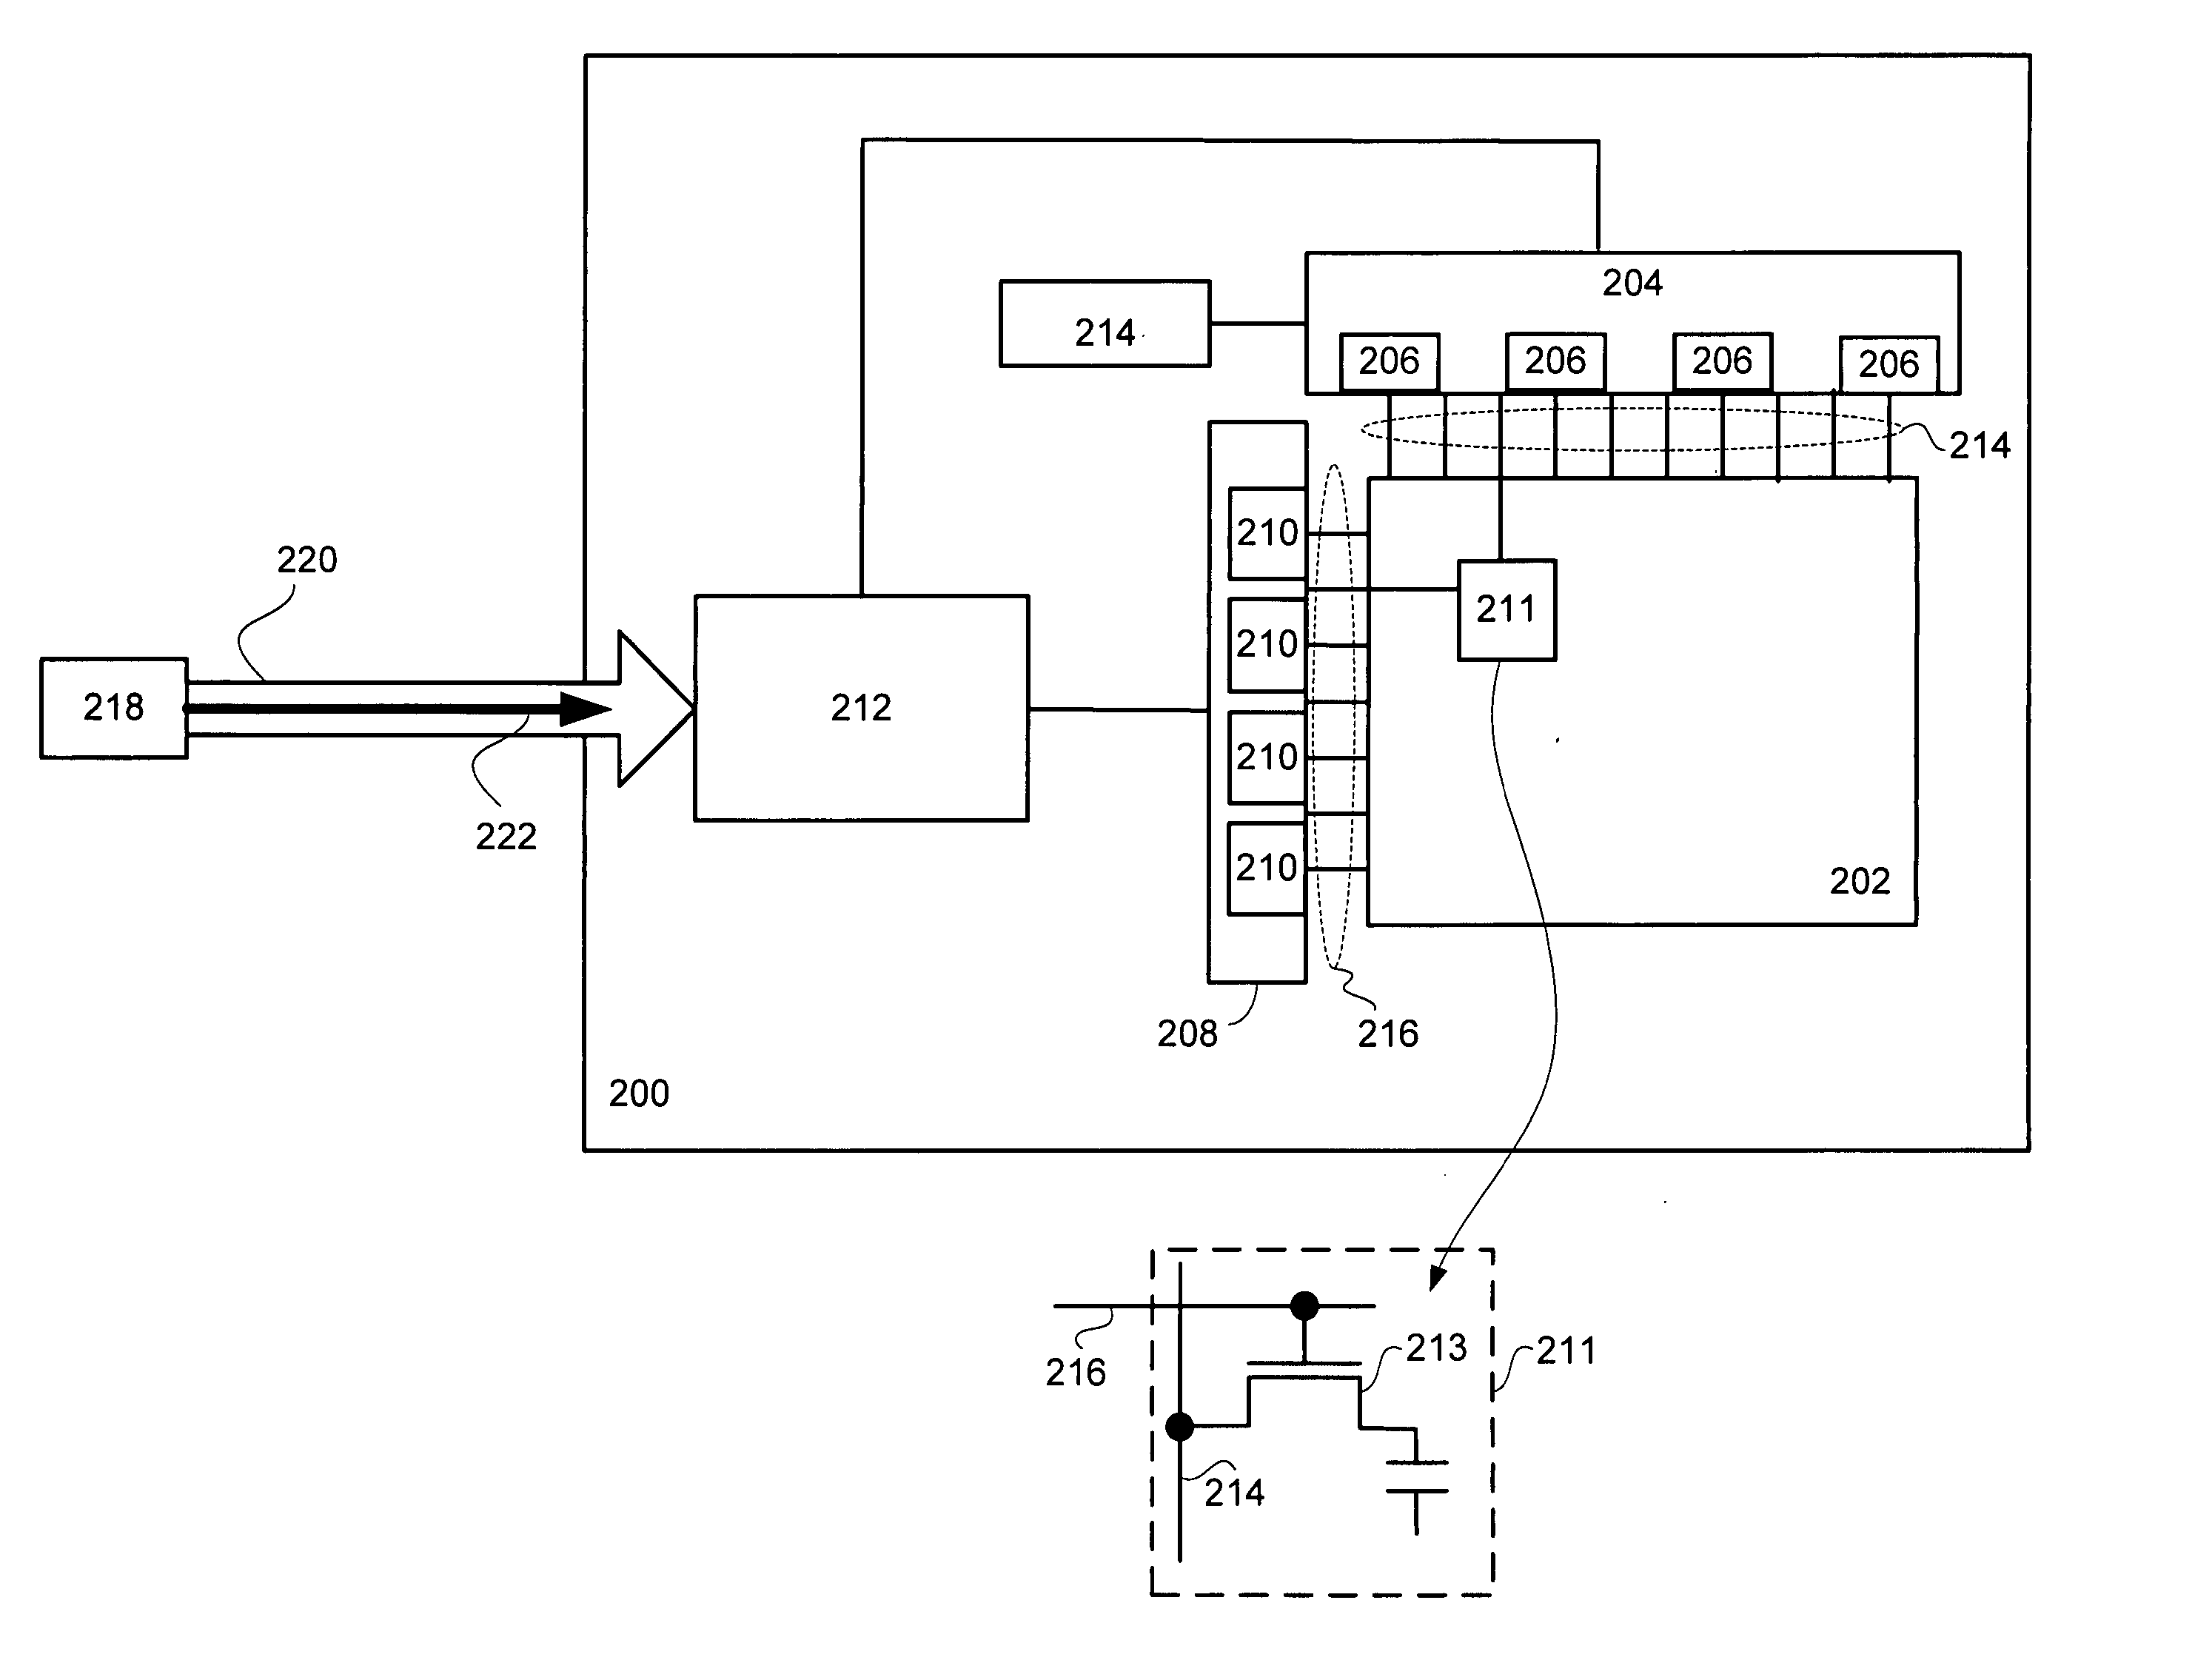 Selective use of LCD overdrive for reducing motion artifacts in an LCD device